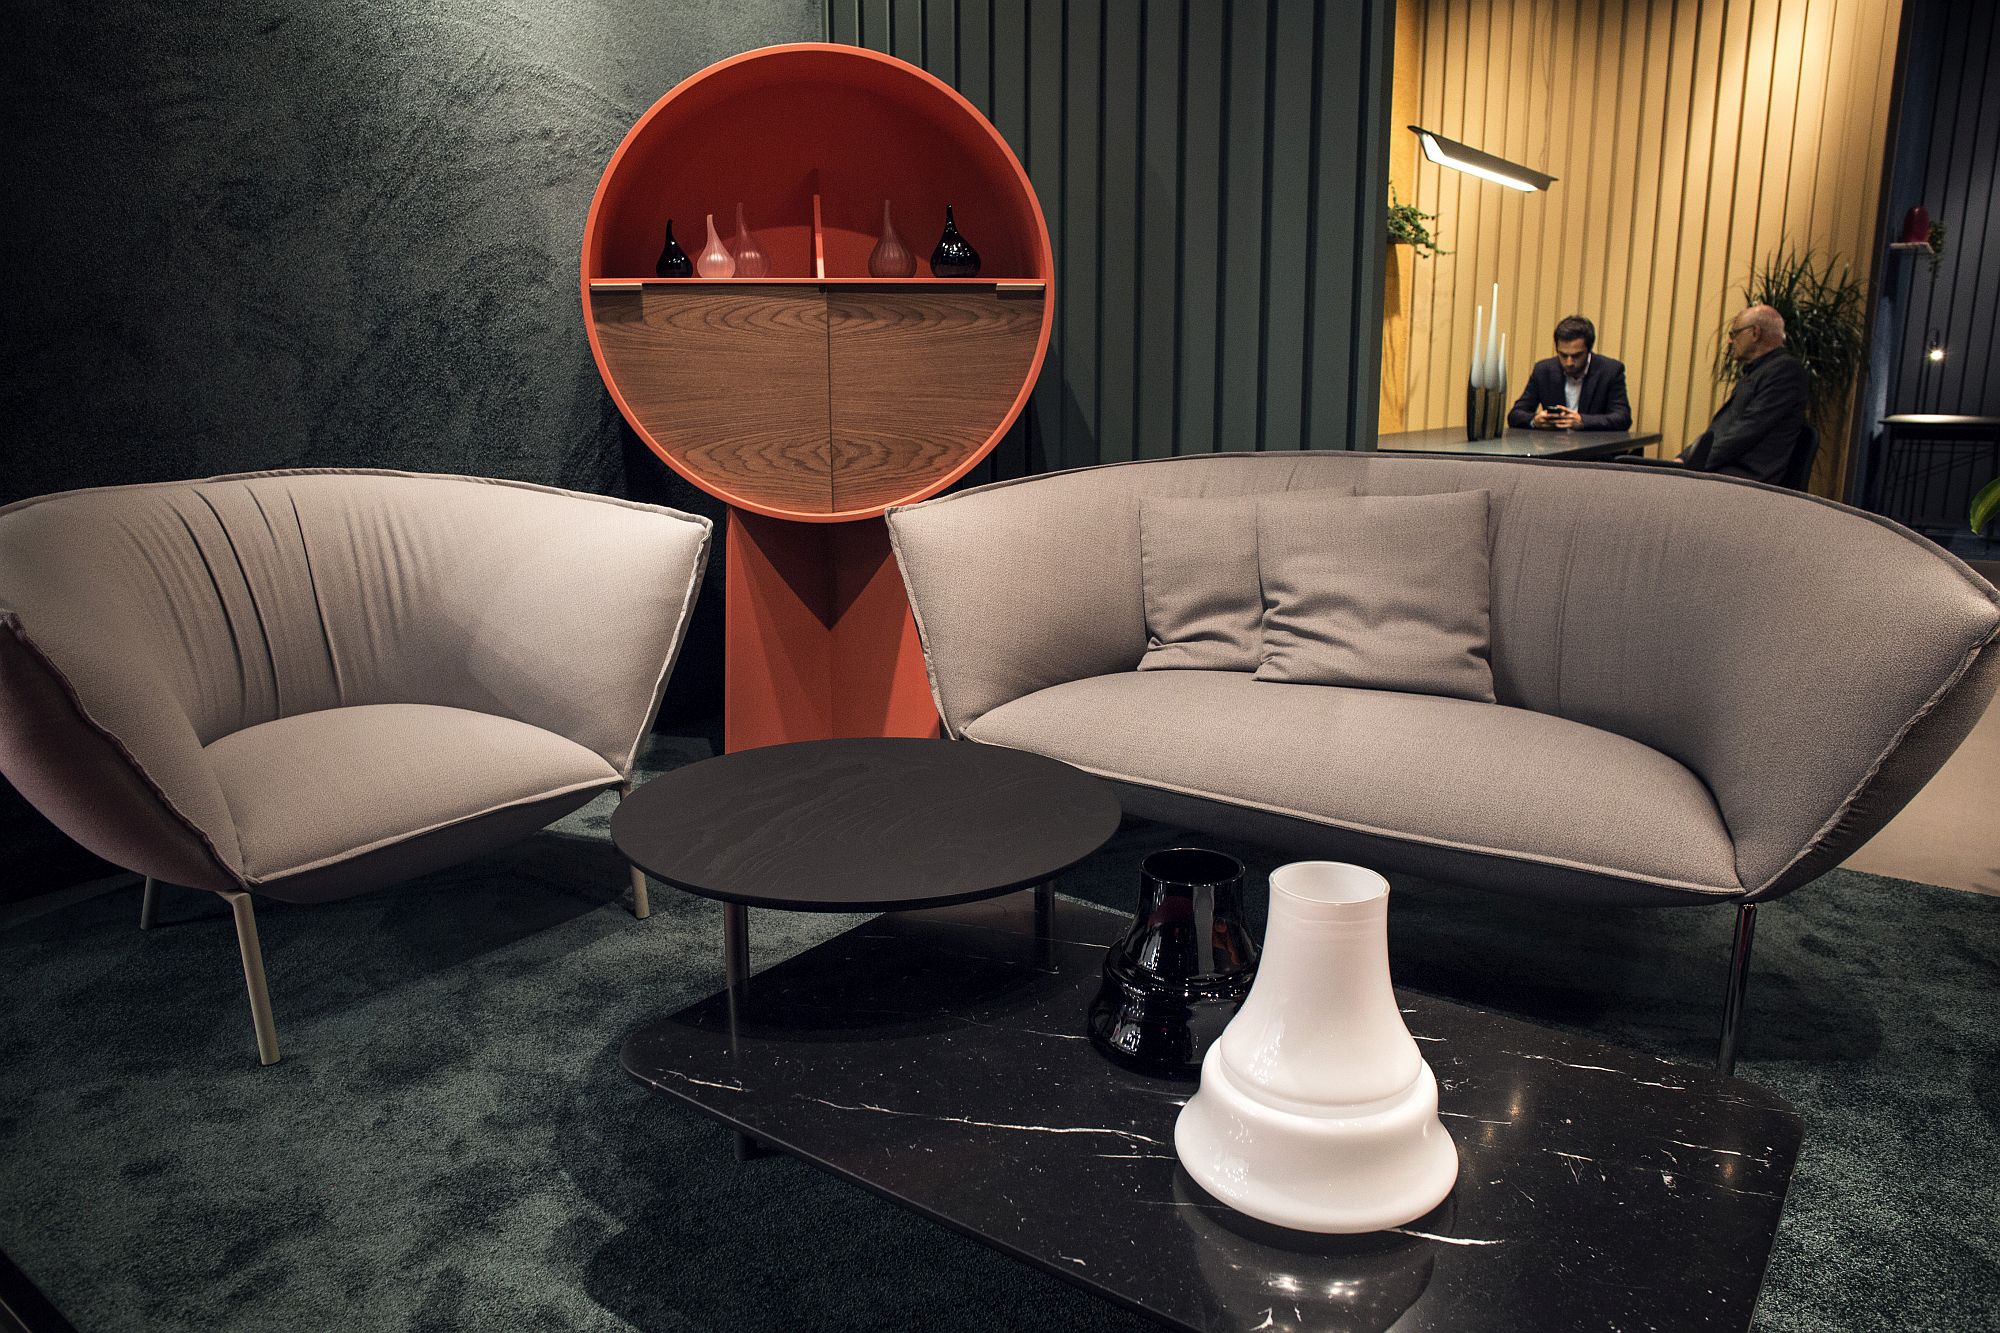 Small circular side table combine with low-slung coffee table in the living room